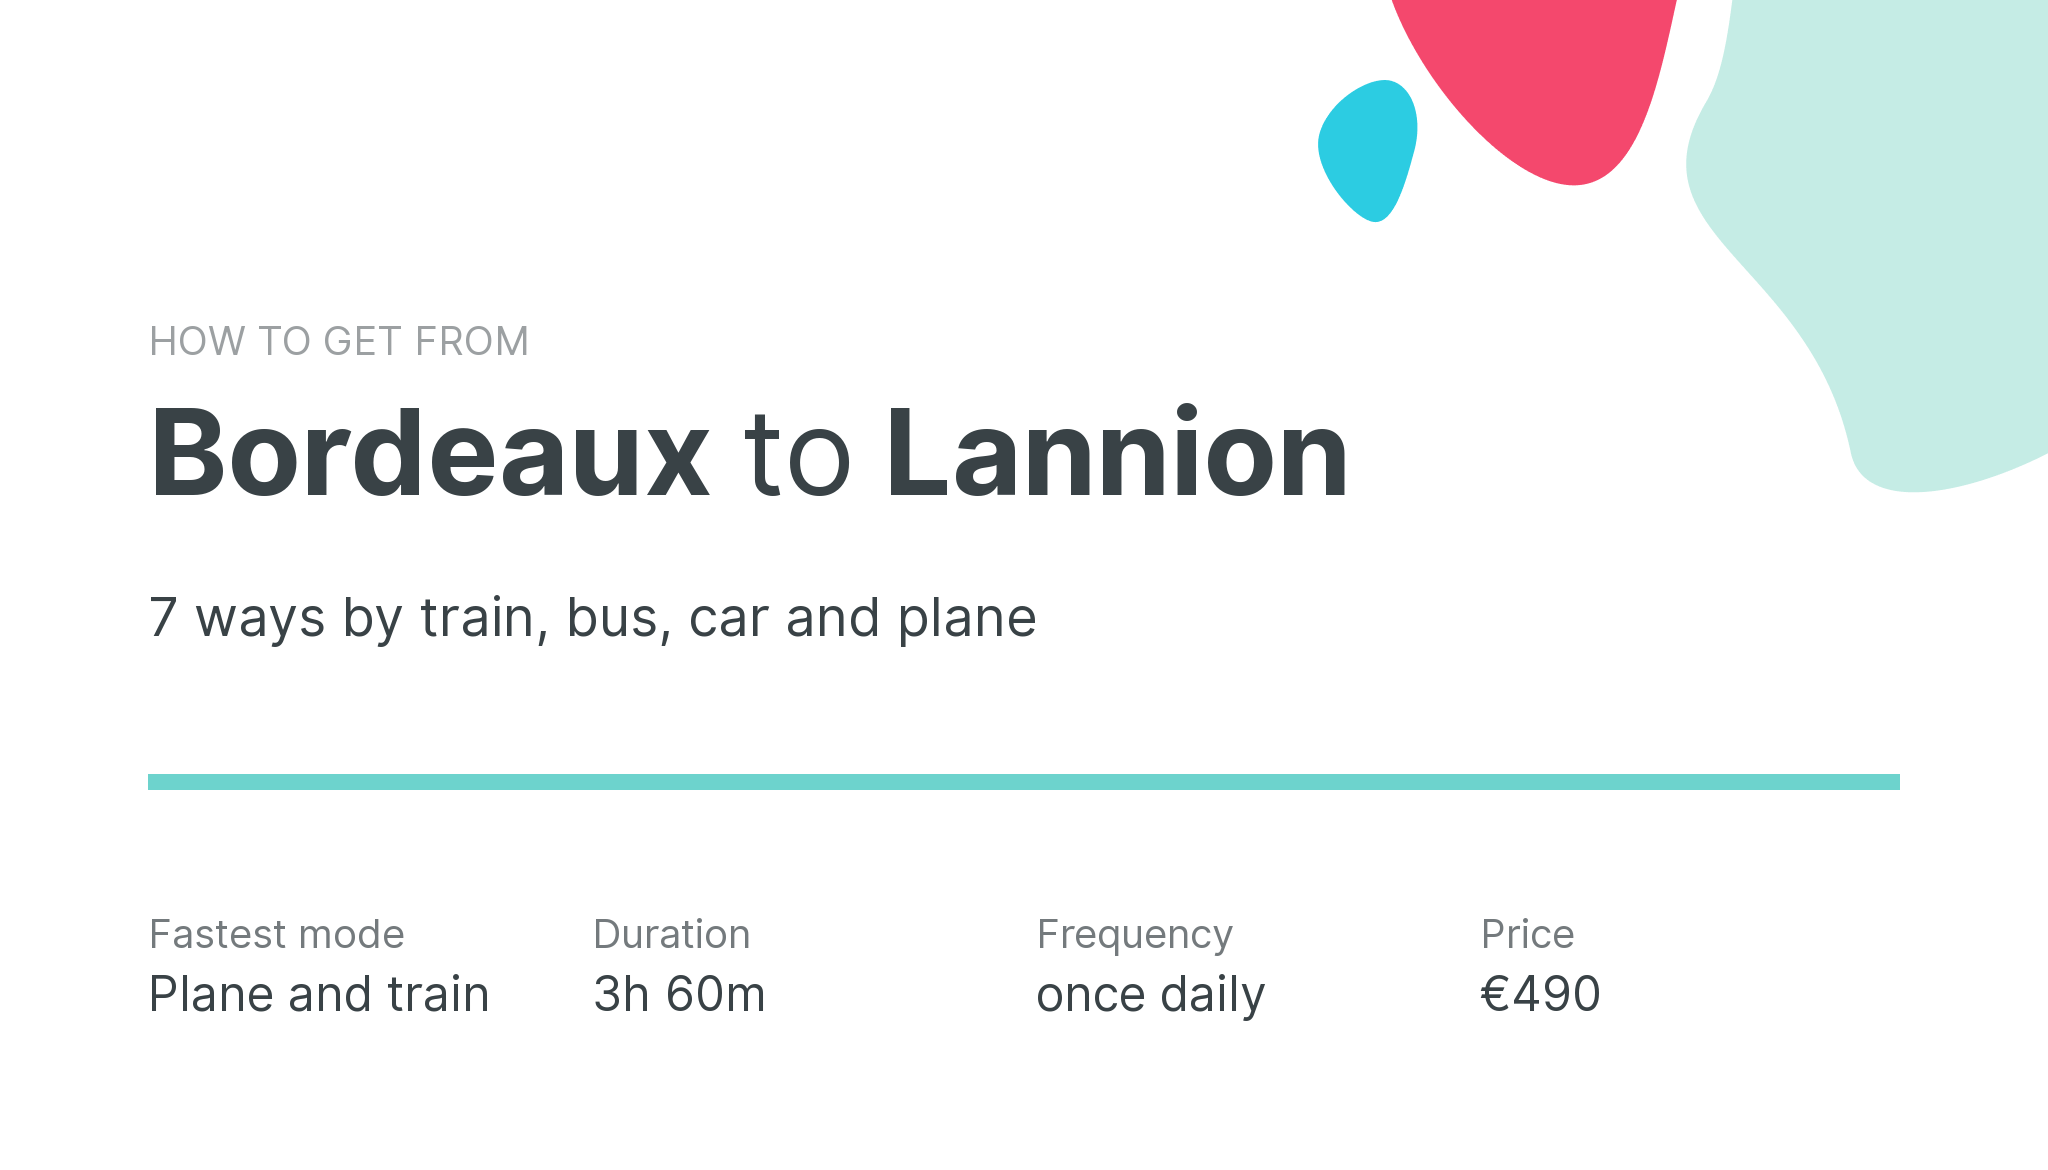 How do I get from Bordeaux to Lannion